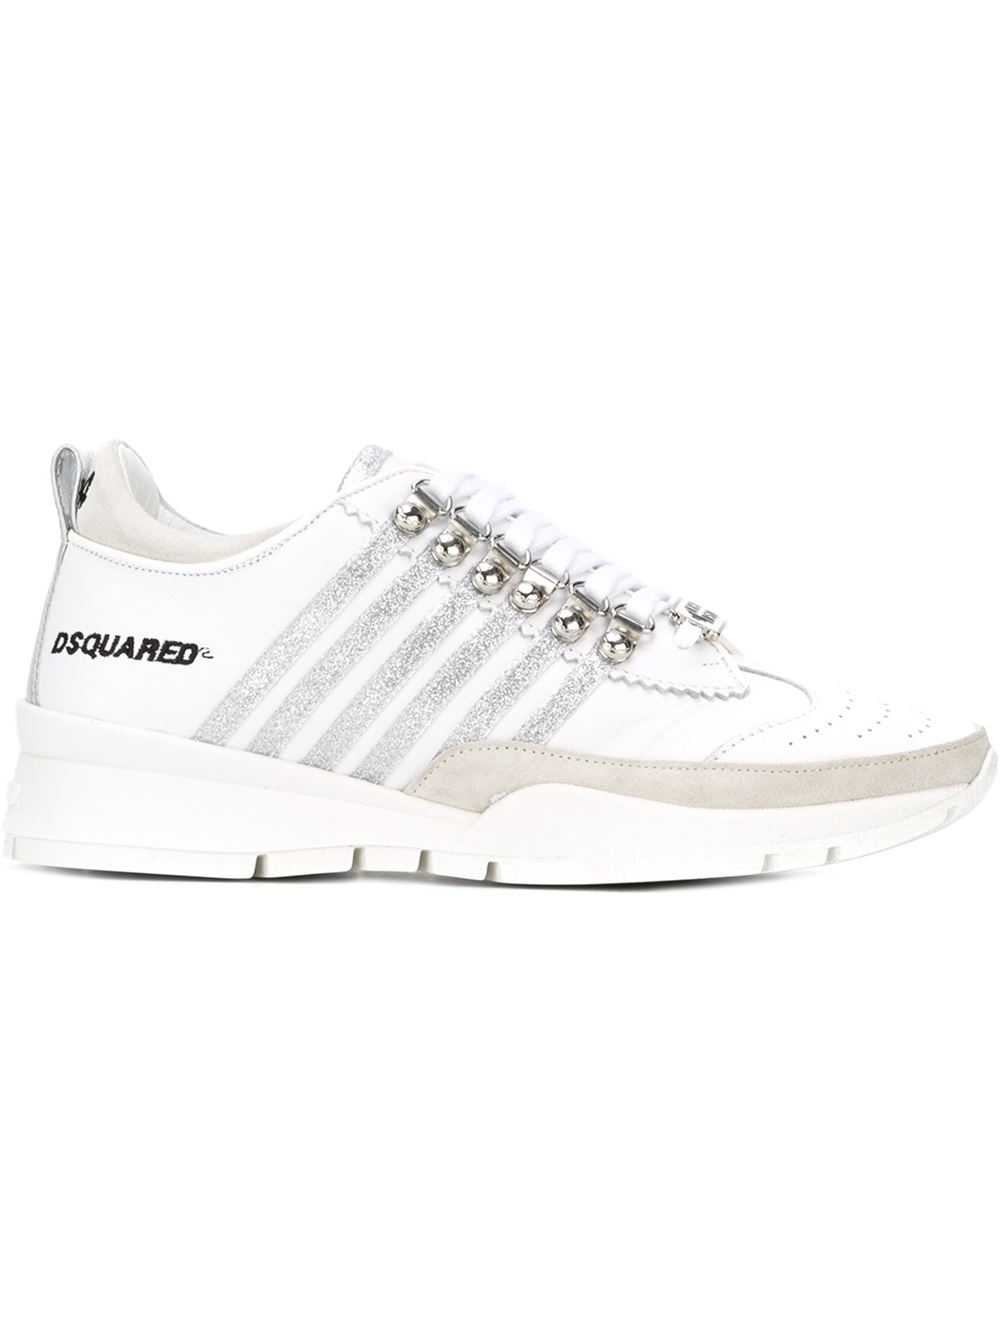 chaussure dsquared homme solde